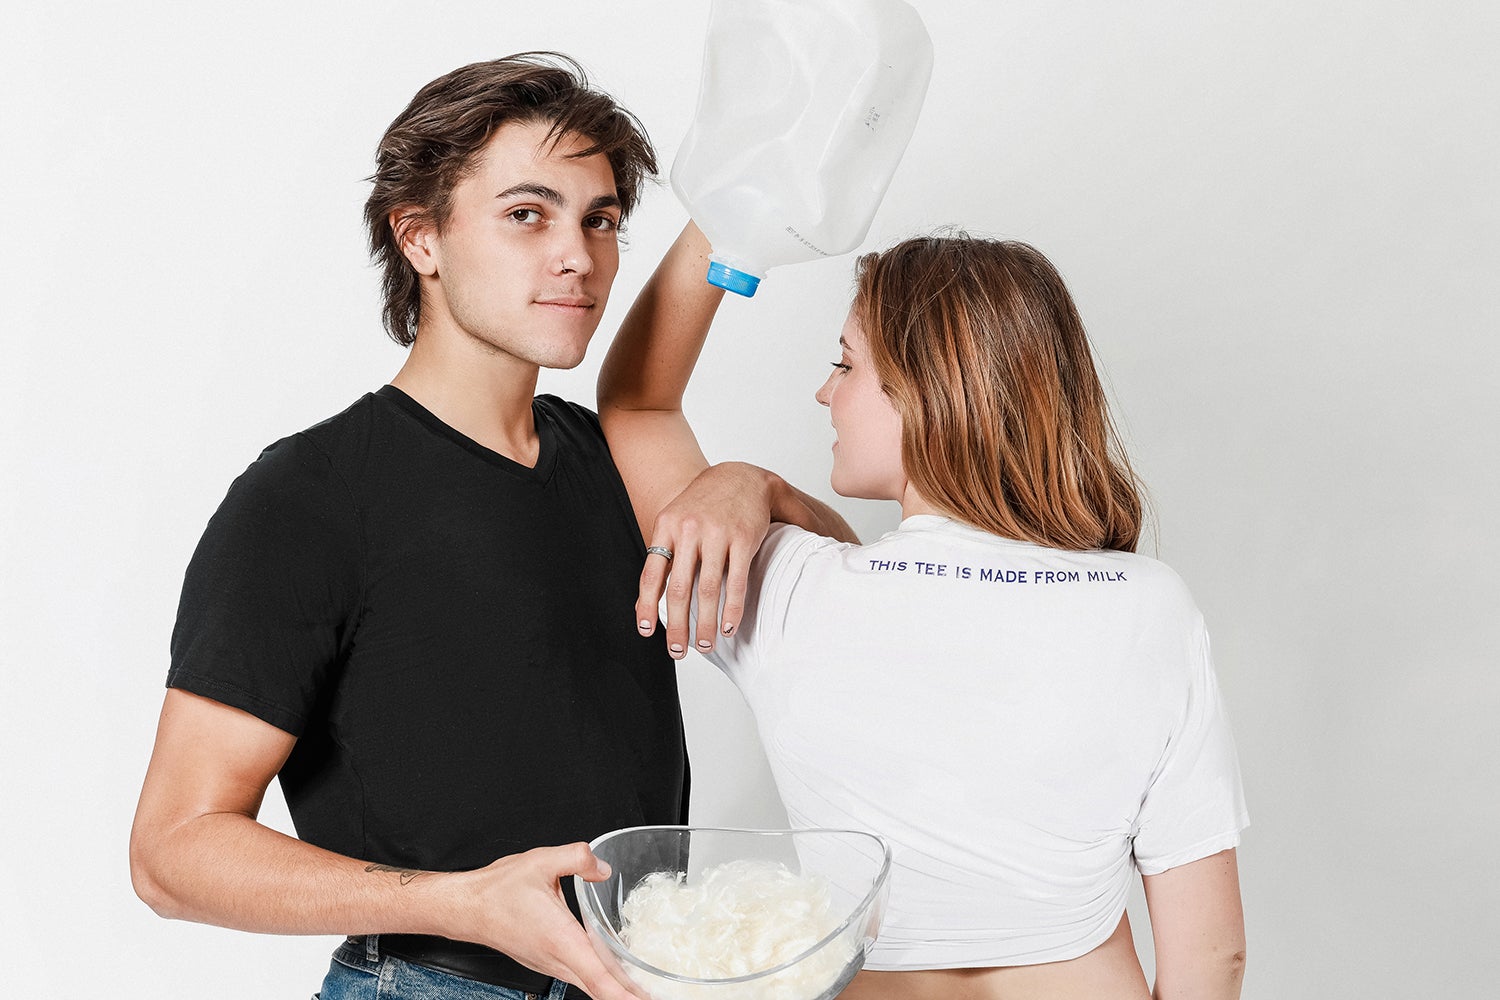 A man and woman pose with a milk jug and a bowl of white milk fiber